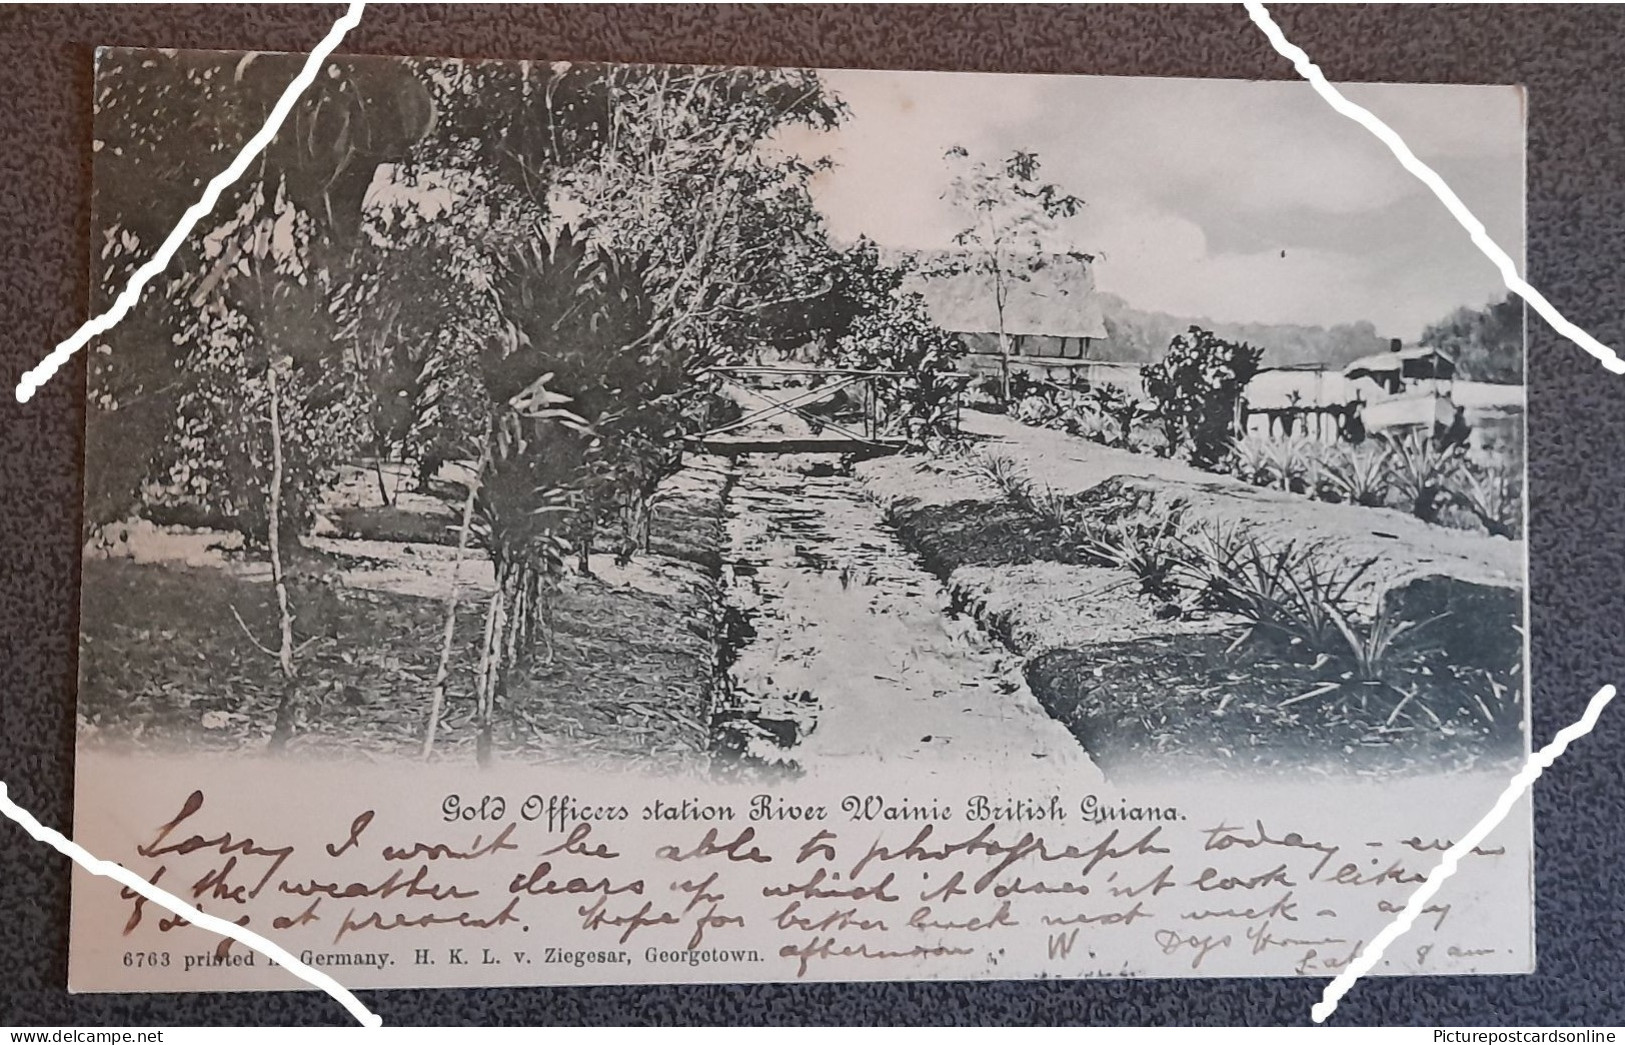 RARE GOLD OFFICES STATION RIVER WAINIE BRITISH GUIANA WEST INDIES OLD B/W POSTCARD SOUTH AMERICA MINING - Guyana (formerly British Guyana)